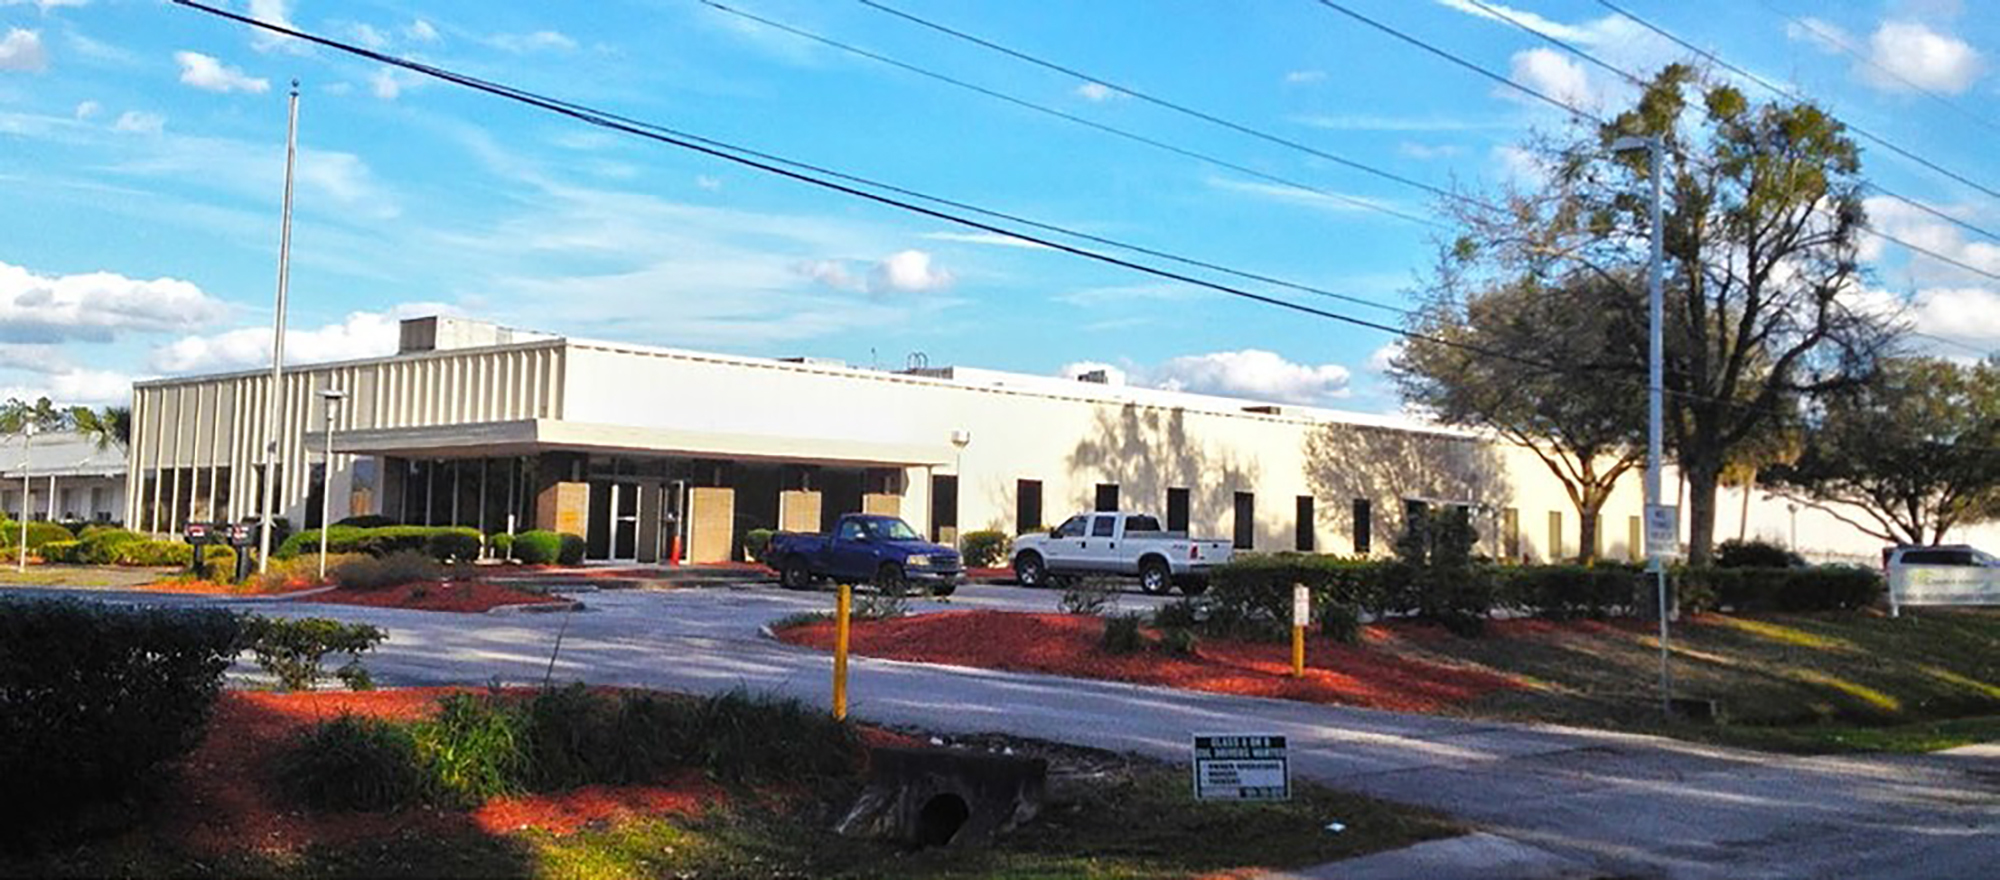 Tenants at 8451 Western Way include Conser Moving and Storage, Total Military Management, Jacksonville Juniors Volleyball Association and Niles Building Products.